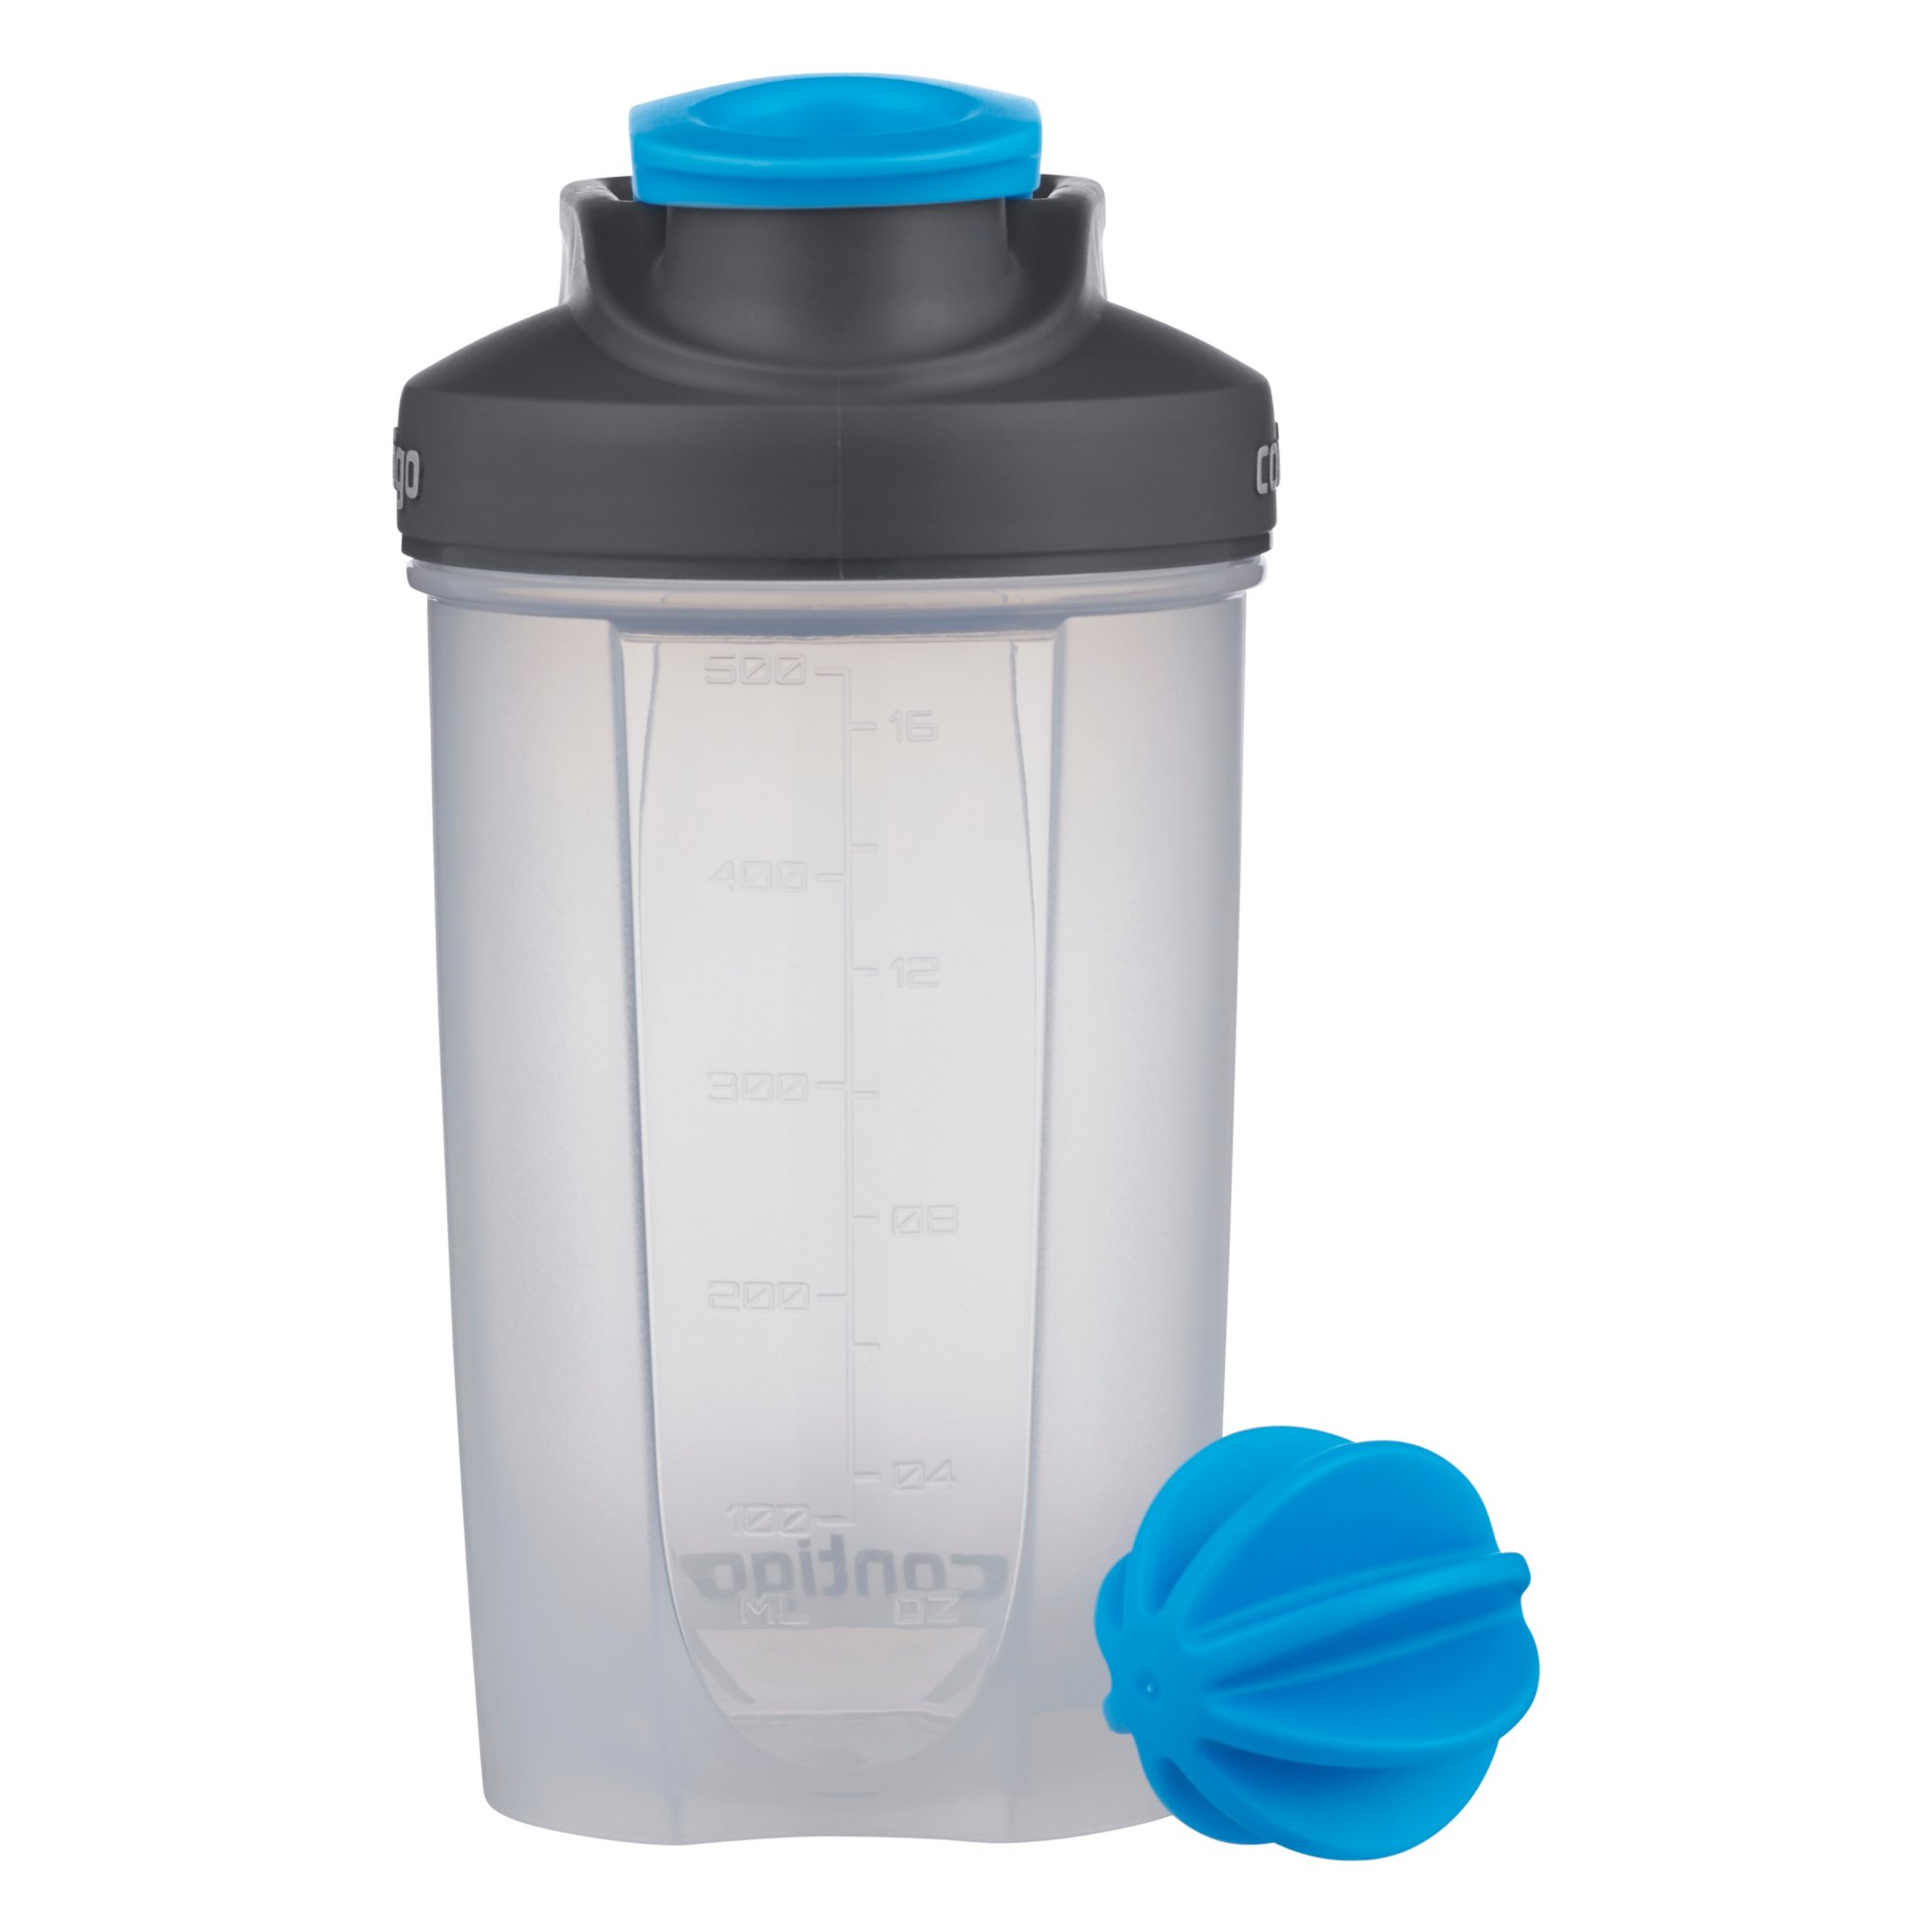 https://s7d9.scene7.com/is/image/NewellRubbermaid/2103608_20oz%20Shake%20N%20Go%20Fit%2020oz_Blue_Front%20with%20Ball?wid=2000&hei=2000